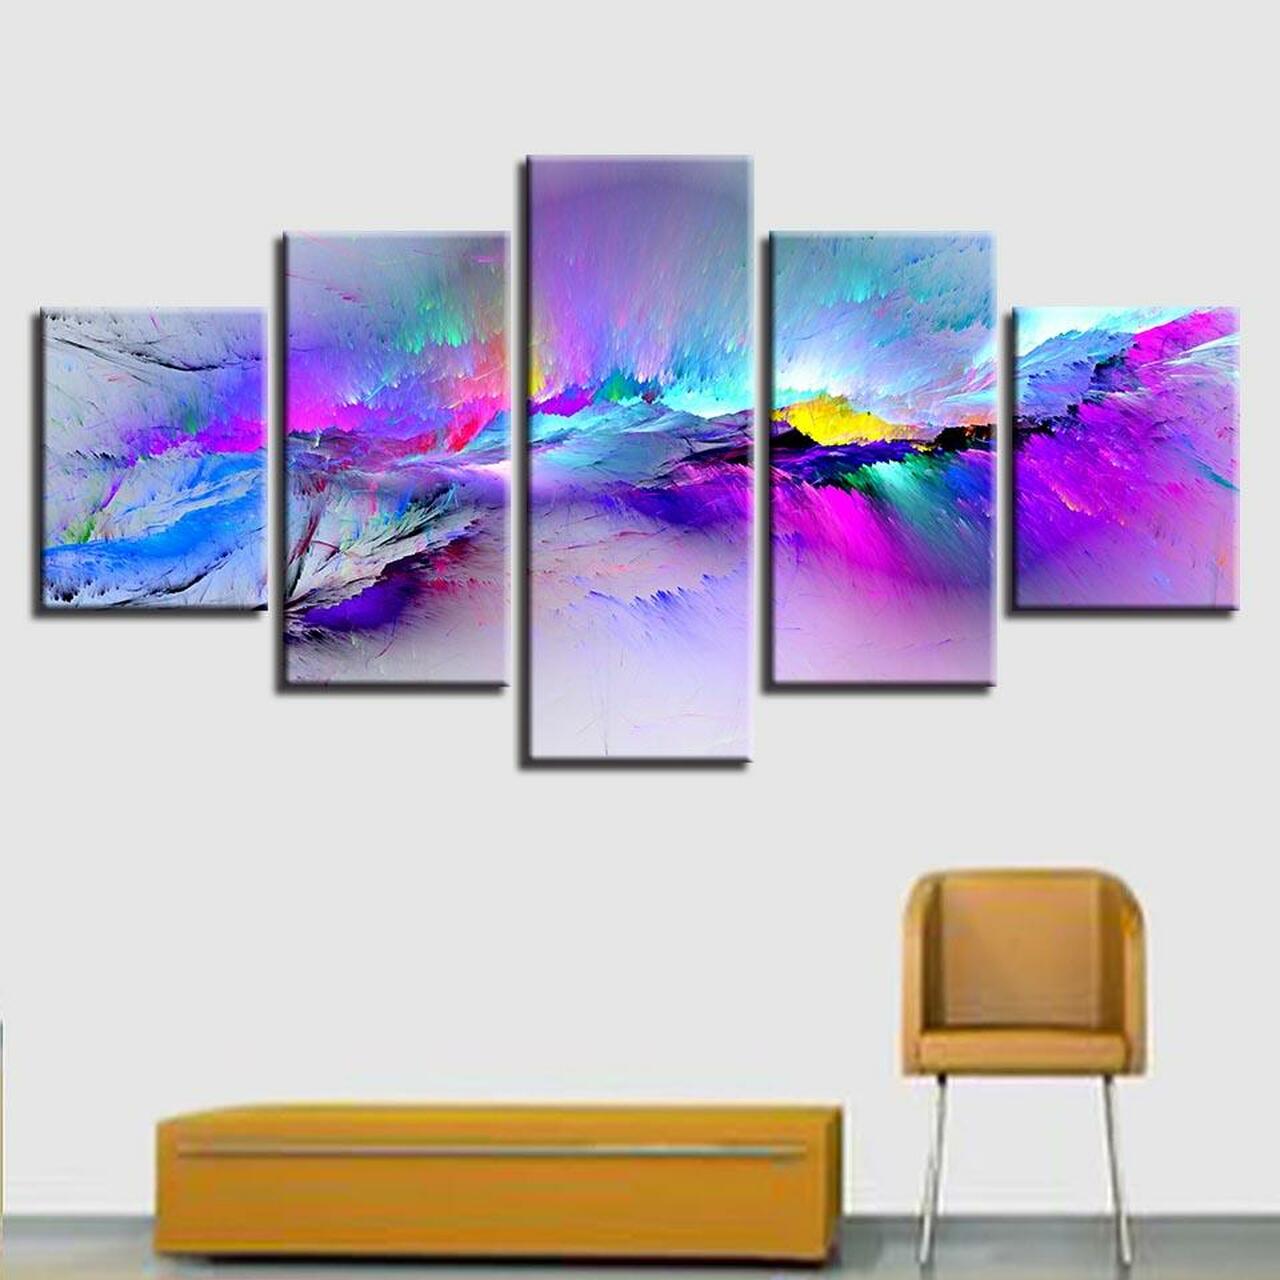 COLORFUL CLOUDS 5 Piece Canvas Art Wall Decor